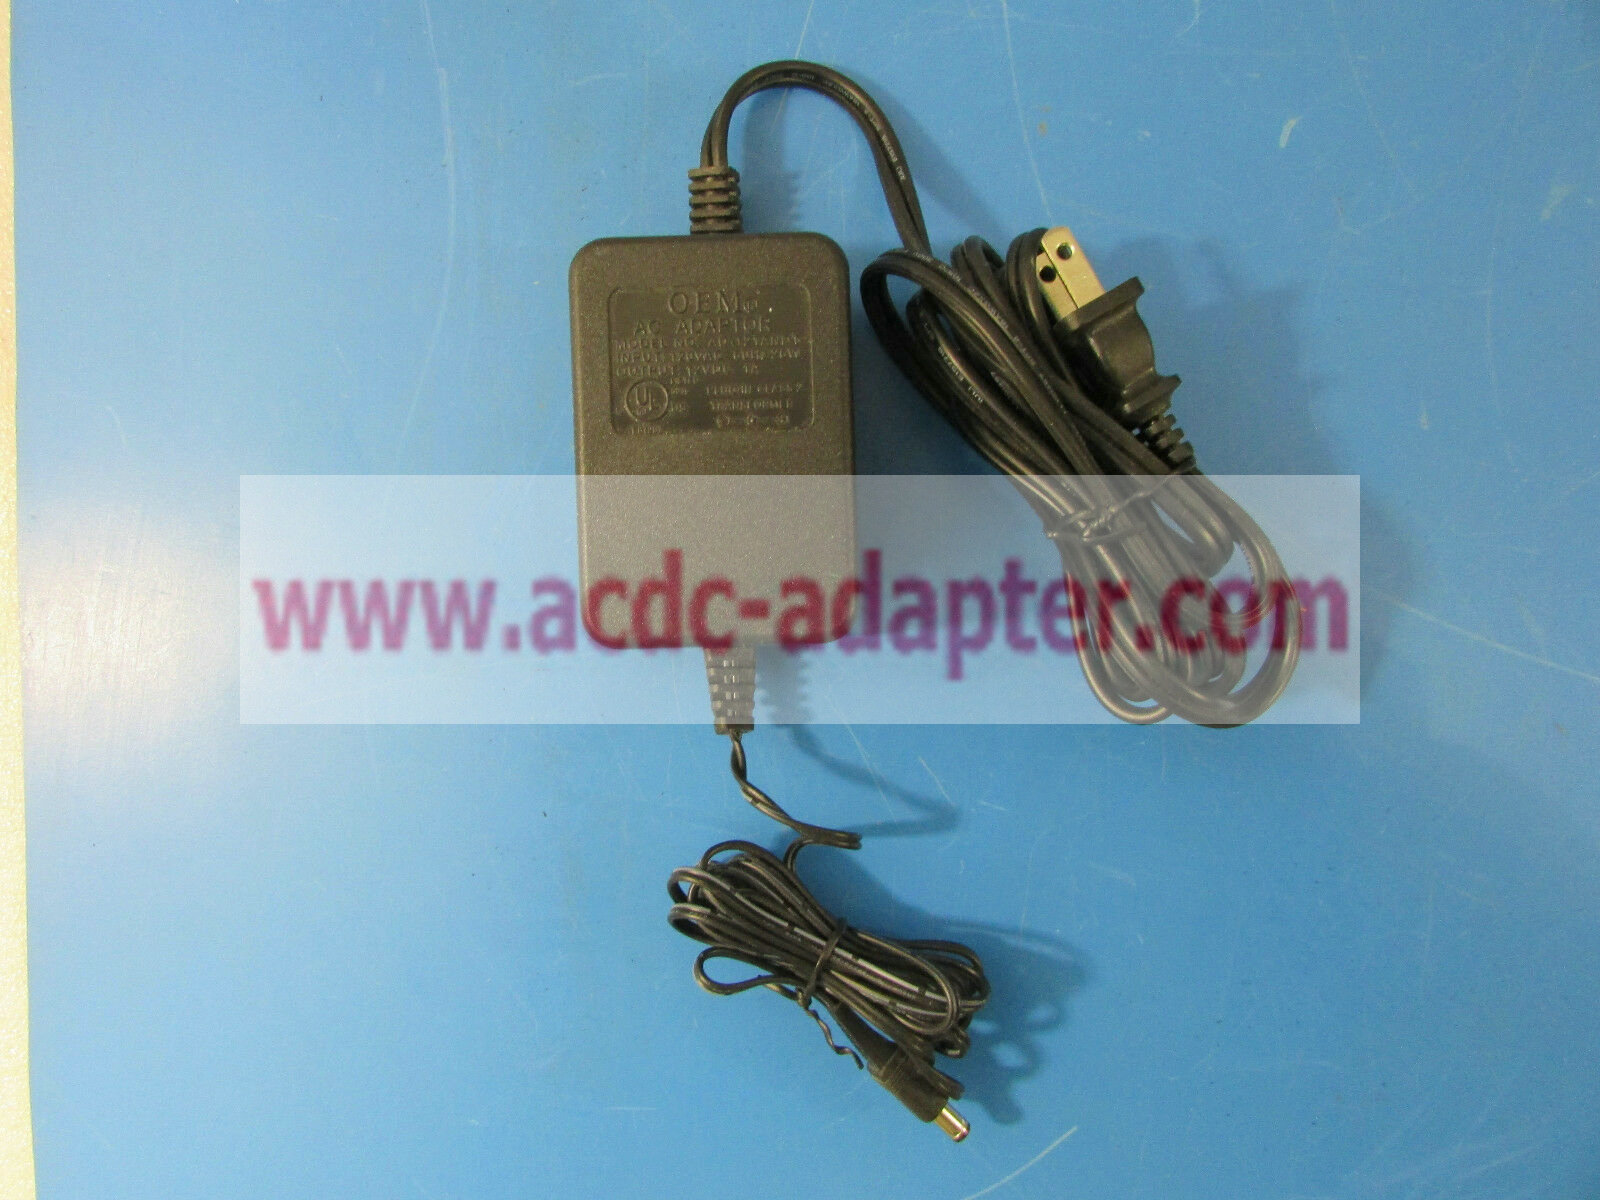 NEW 12VDC 1A AD-121ANDT AC Adapter Power Supply Plug-In Class 2 Transformer - Click Image to Close